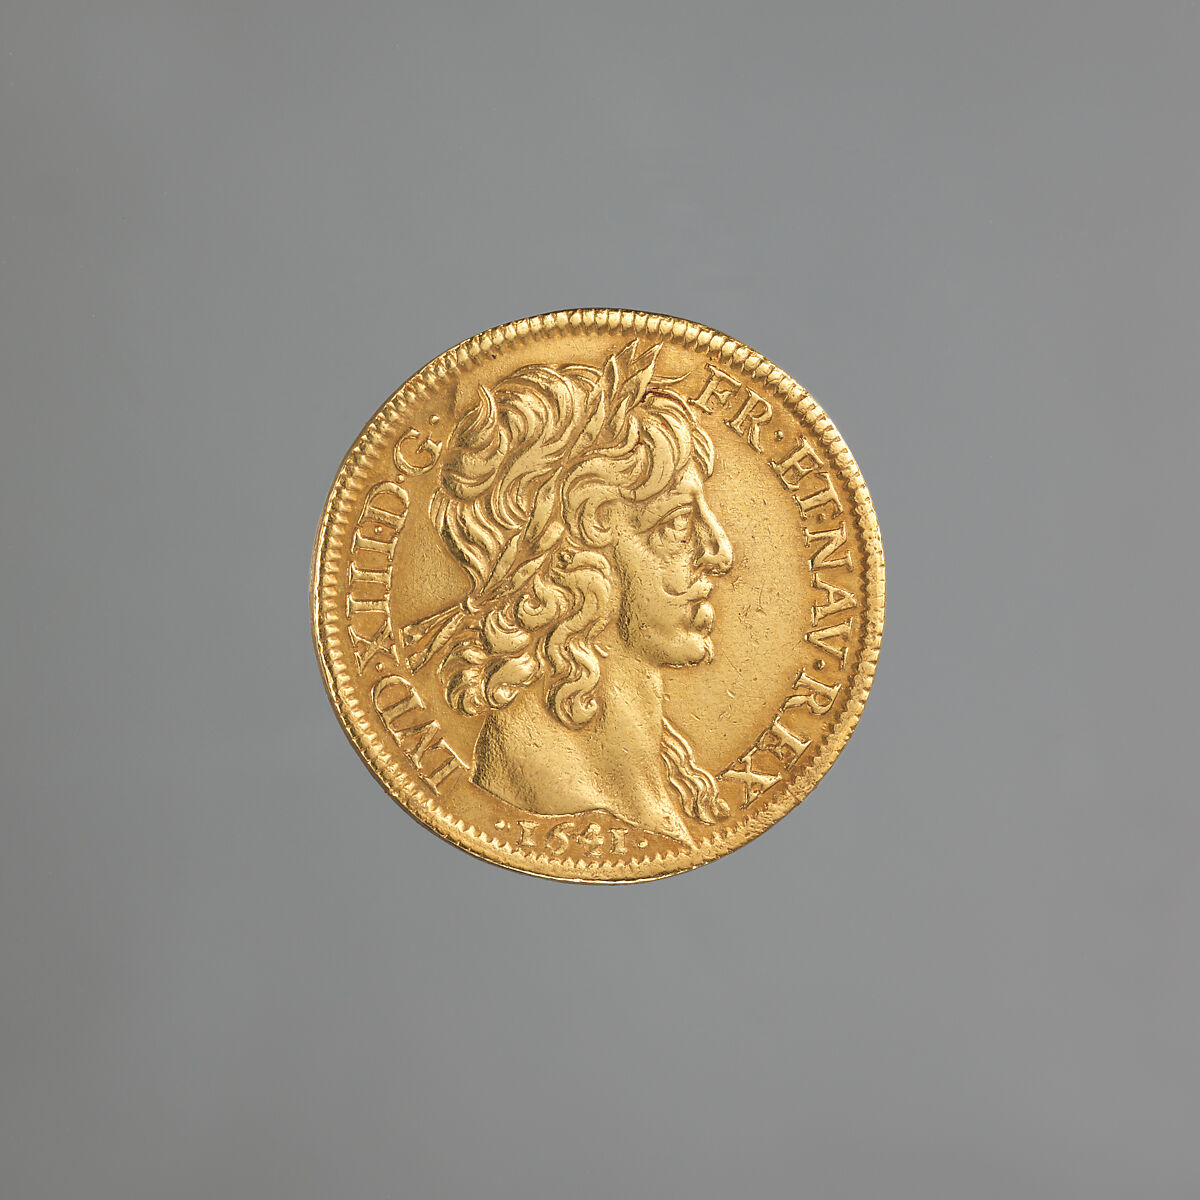 Double Louis d’or of Louis XIII of France (b. 1601; r. 1610-43), Jean Varin (French, Liège baptized 1607–1672 Paris), Gold, French 